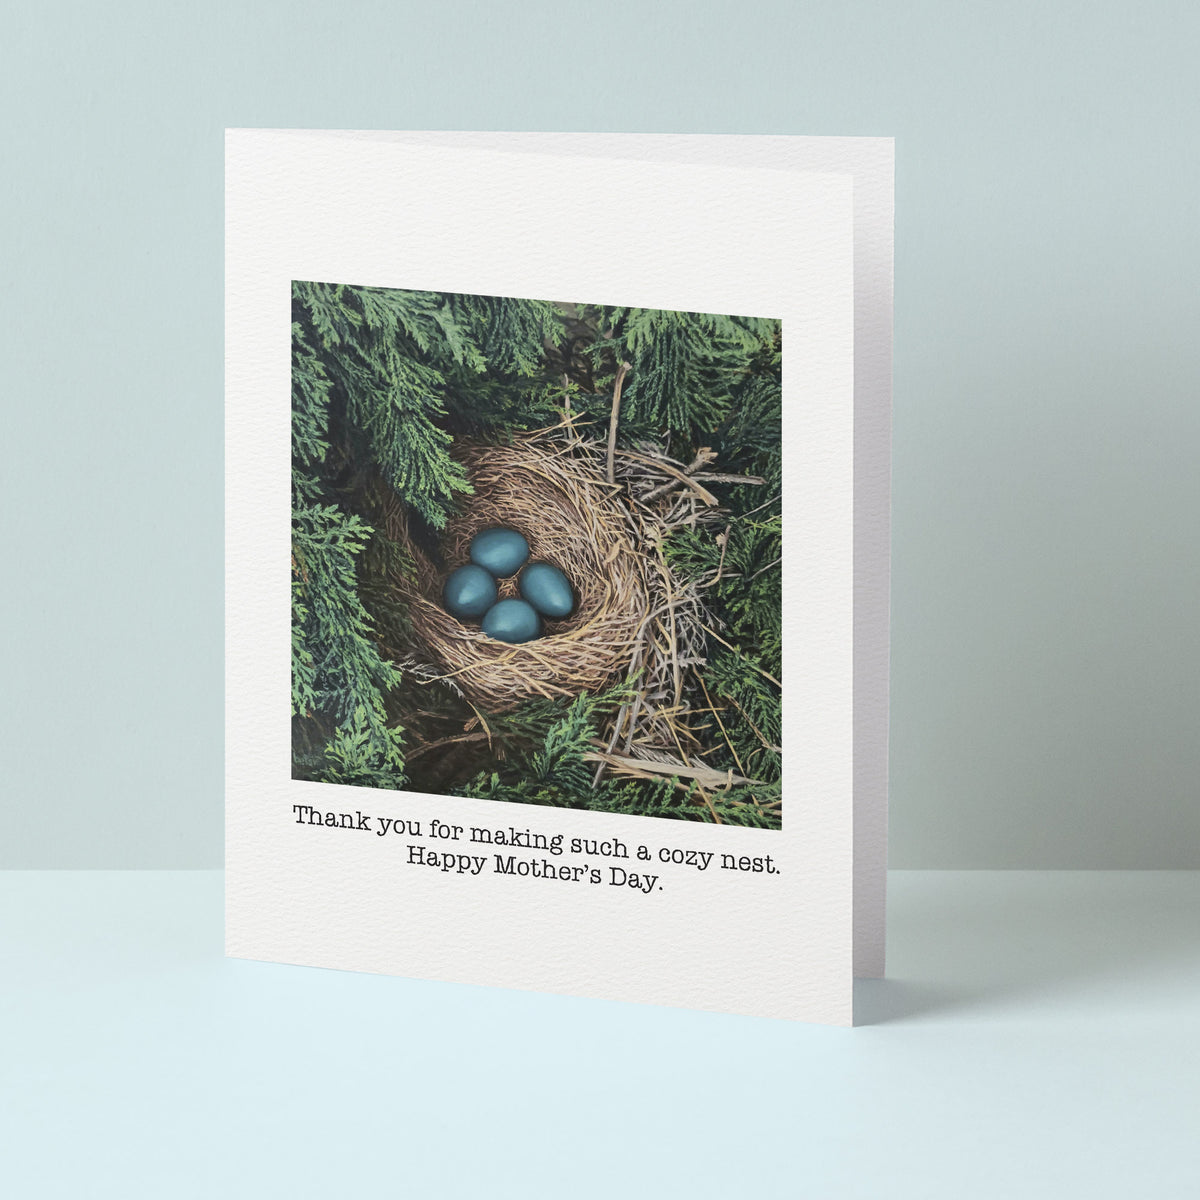 "Thank you for making such a cozy nest" Greeting Card